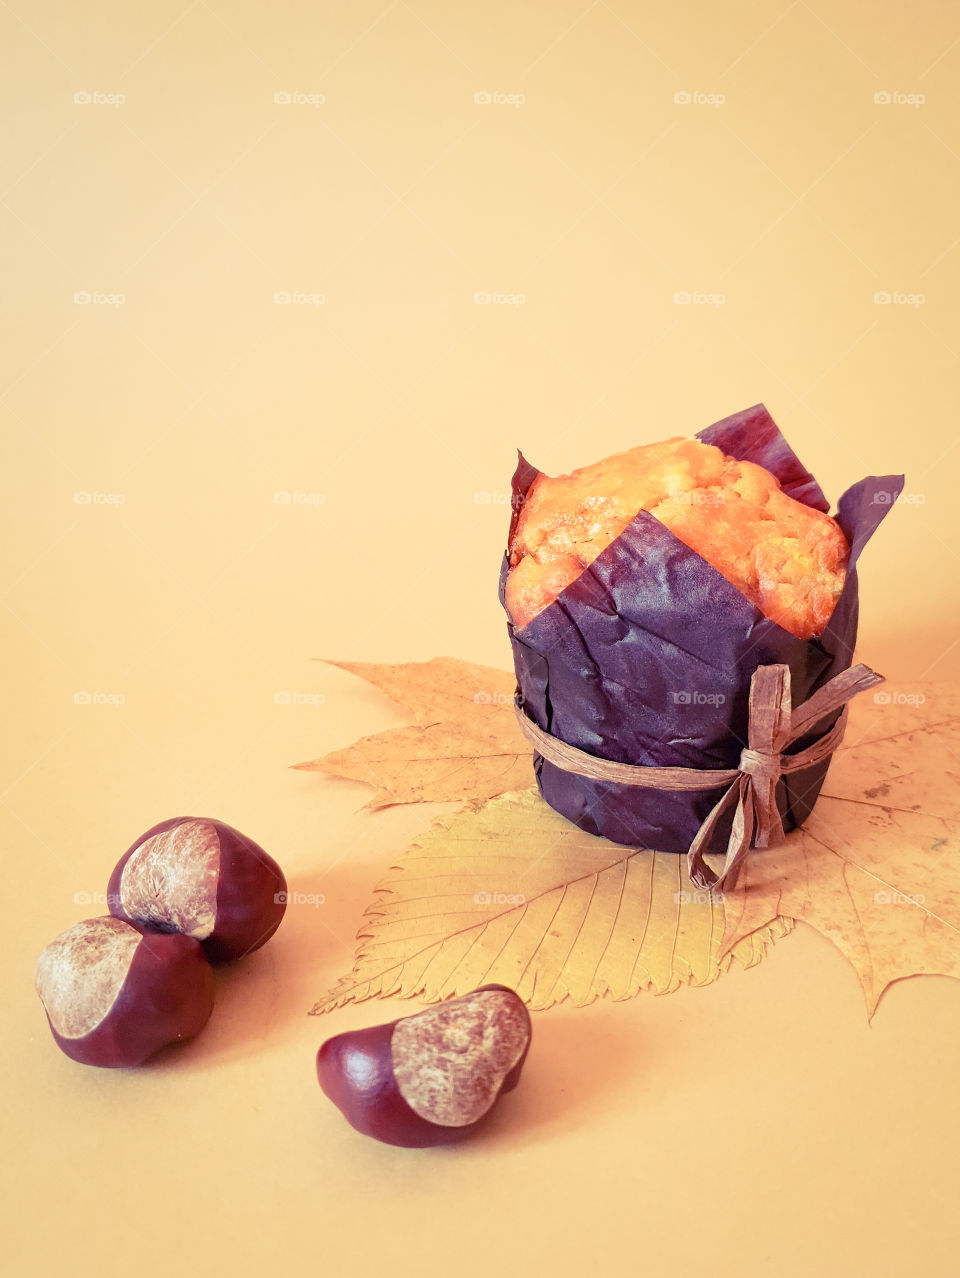 Autumn still life with pastries.  Muffin in brown baking paper with chestnuts on autumn leaves on a plain beige background.  Beginning of autumn